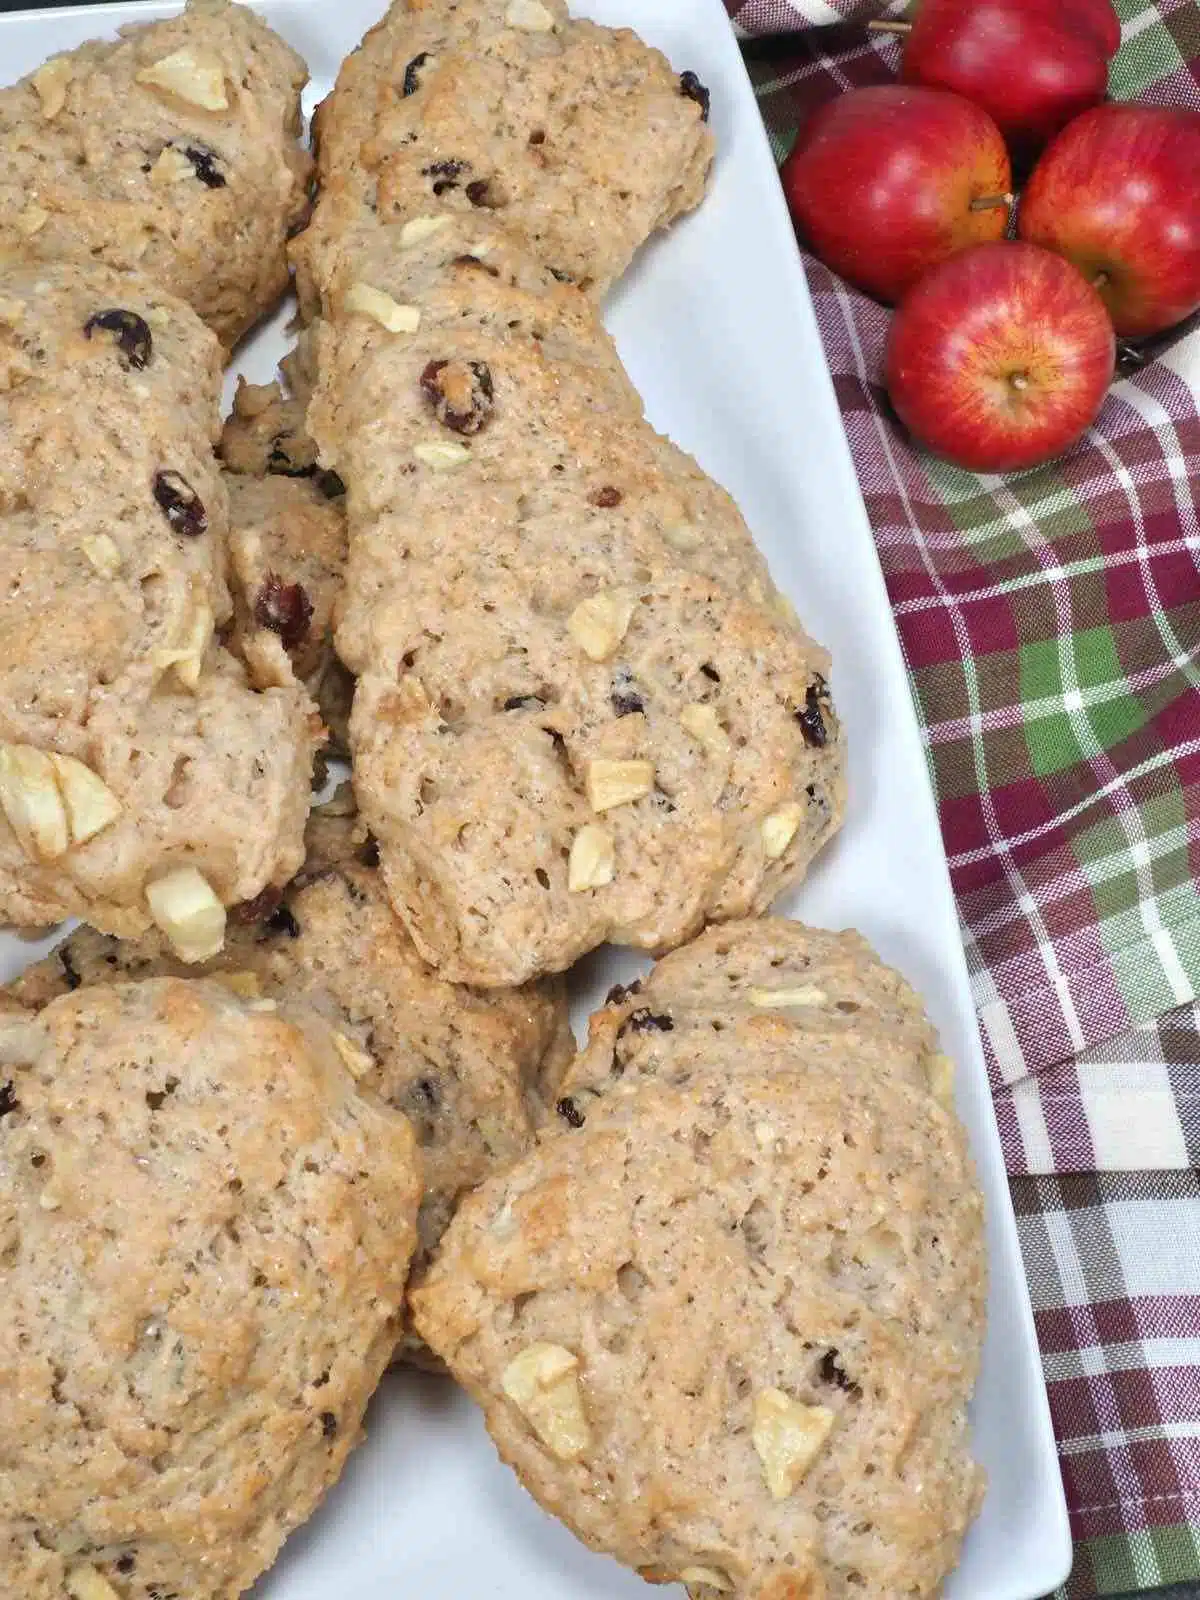 Easy scone recipe with apples and cranberries.